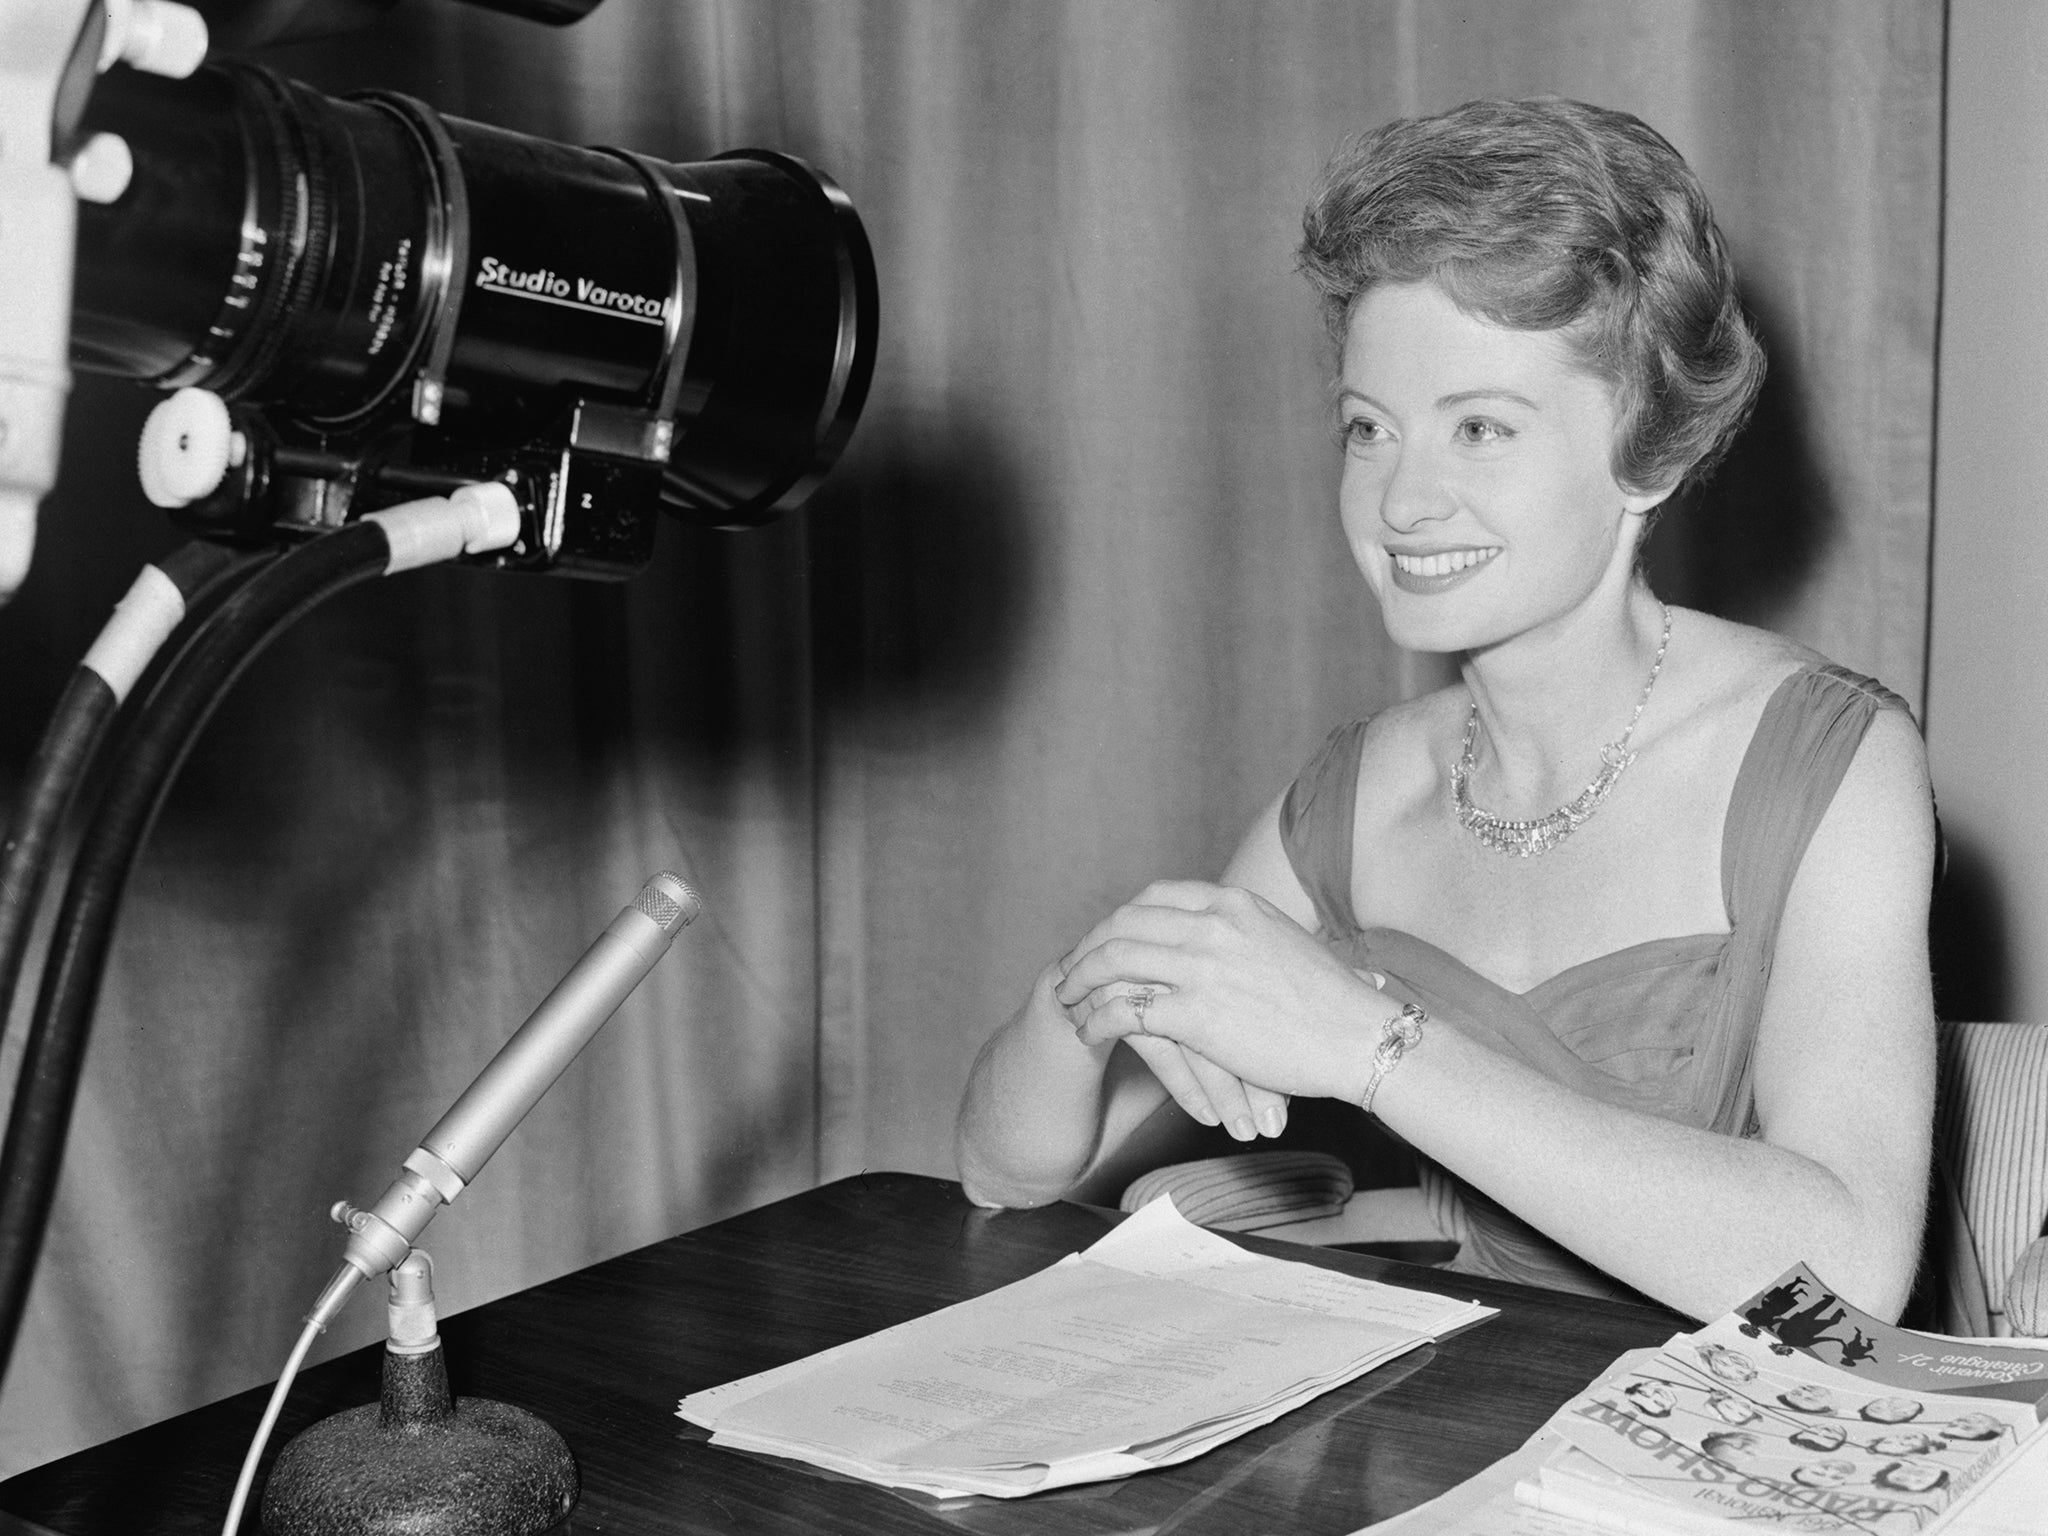 Tracy in 1961 at Earl’s Court, where she was working as an announcer at The Radio Show